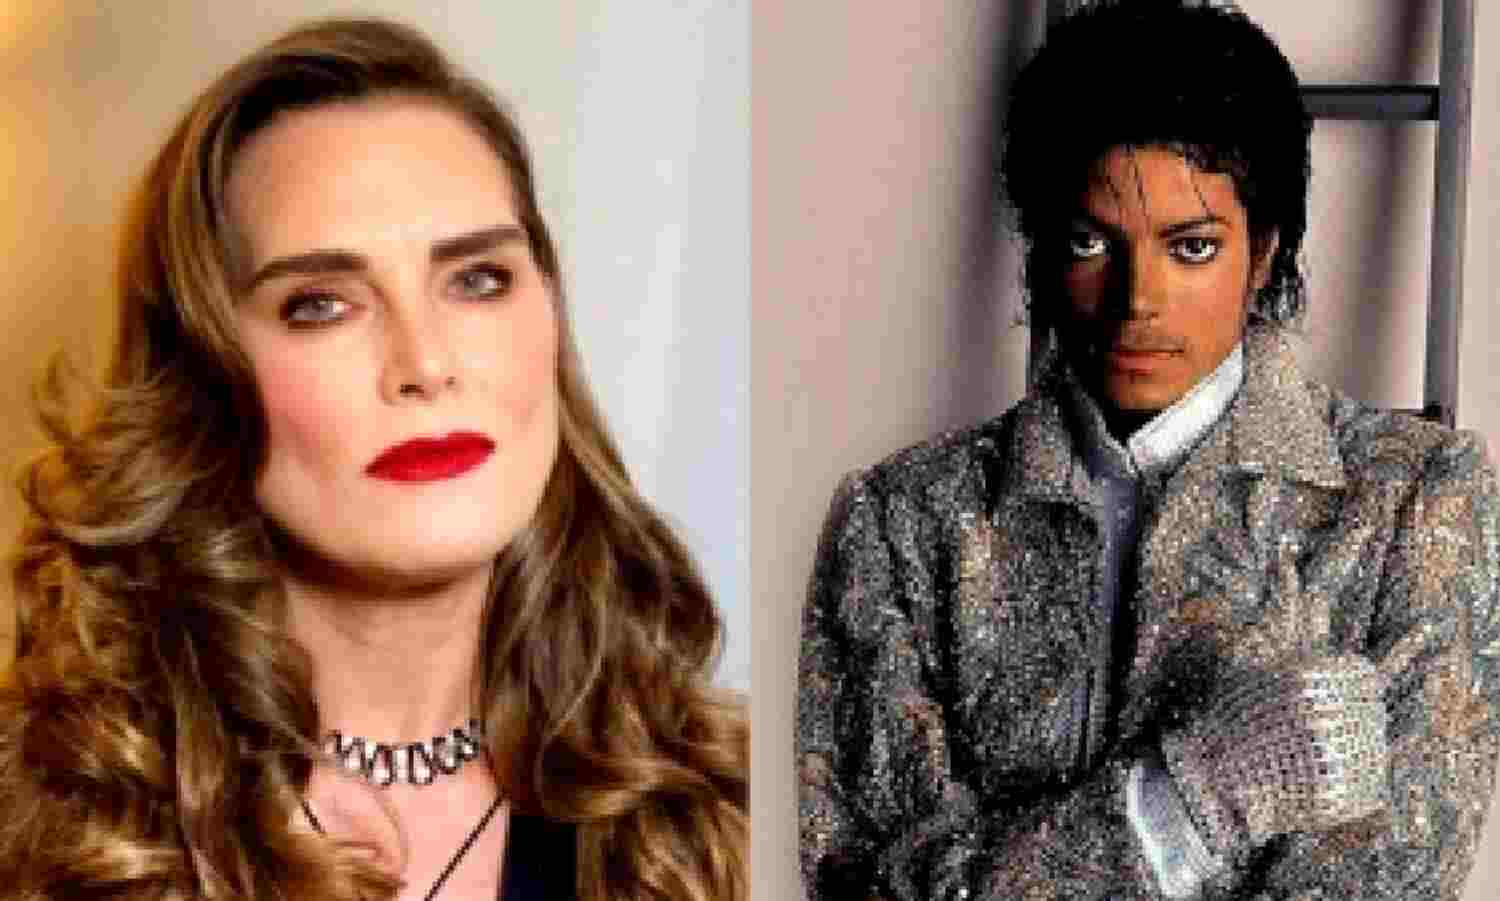 Michael Jackson lied about being in a relationship with Brooke Shields